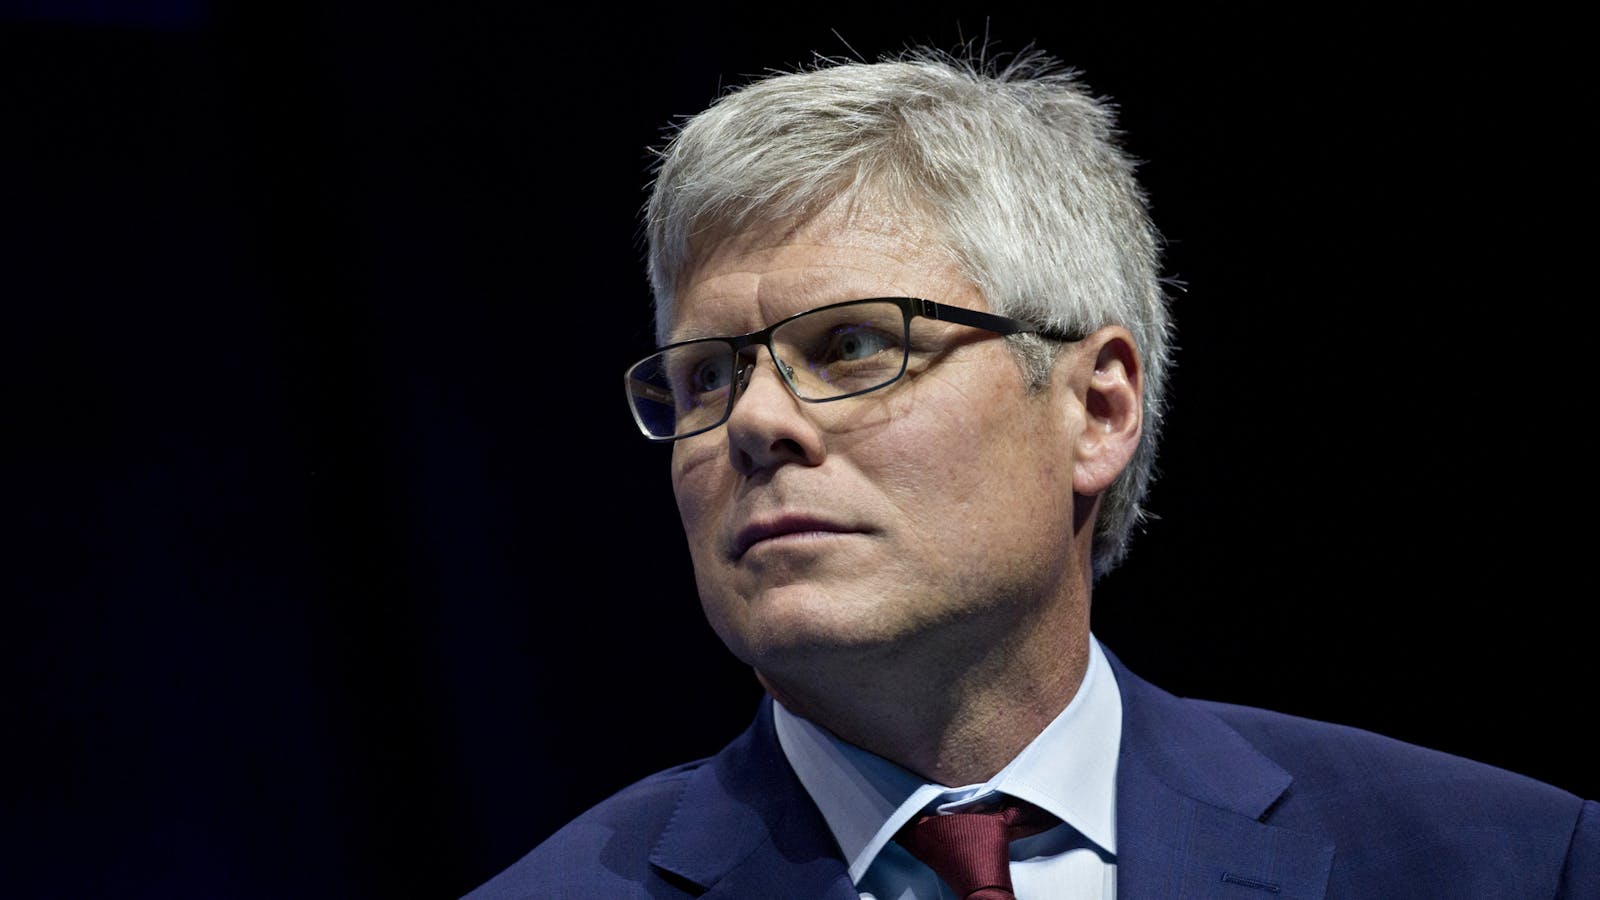 Qualcomm CEO Steve Mollenkopf  at an event in Washington, D.C., U.S., on Thursday. Photo by Bloomberg